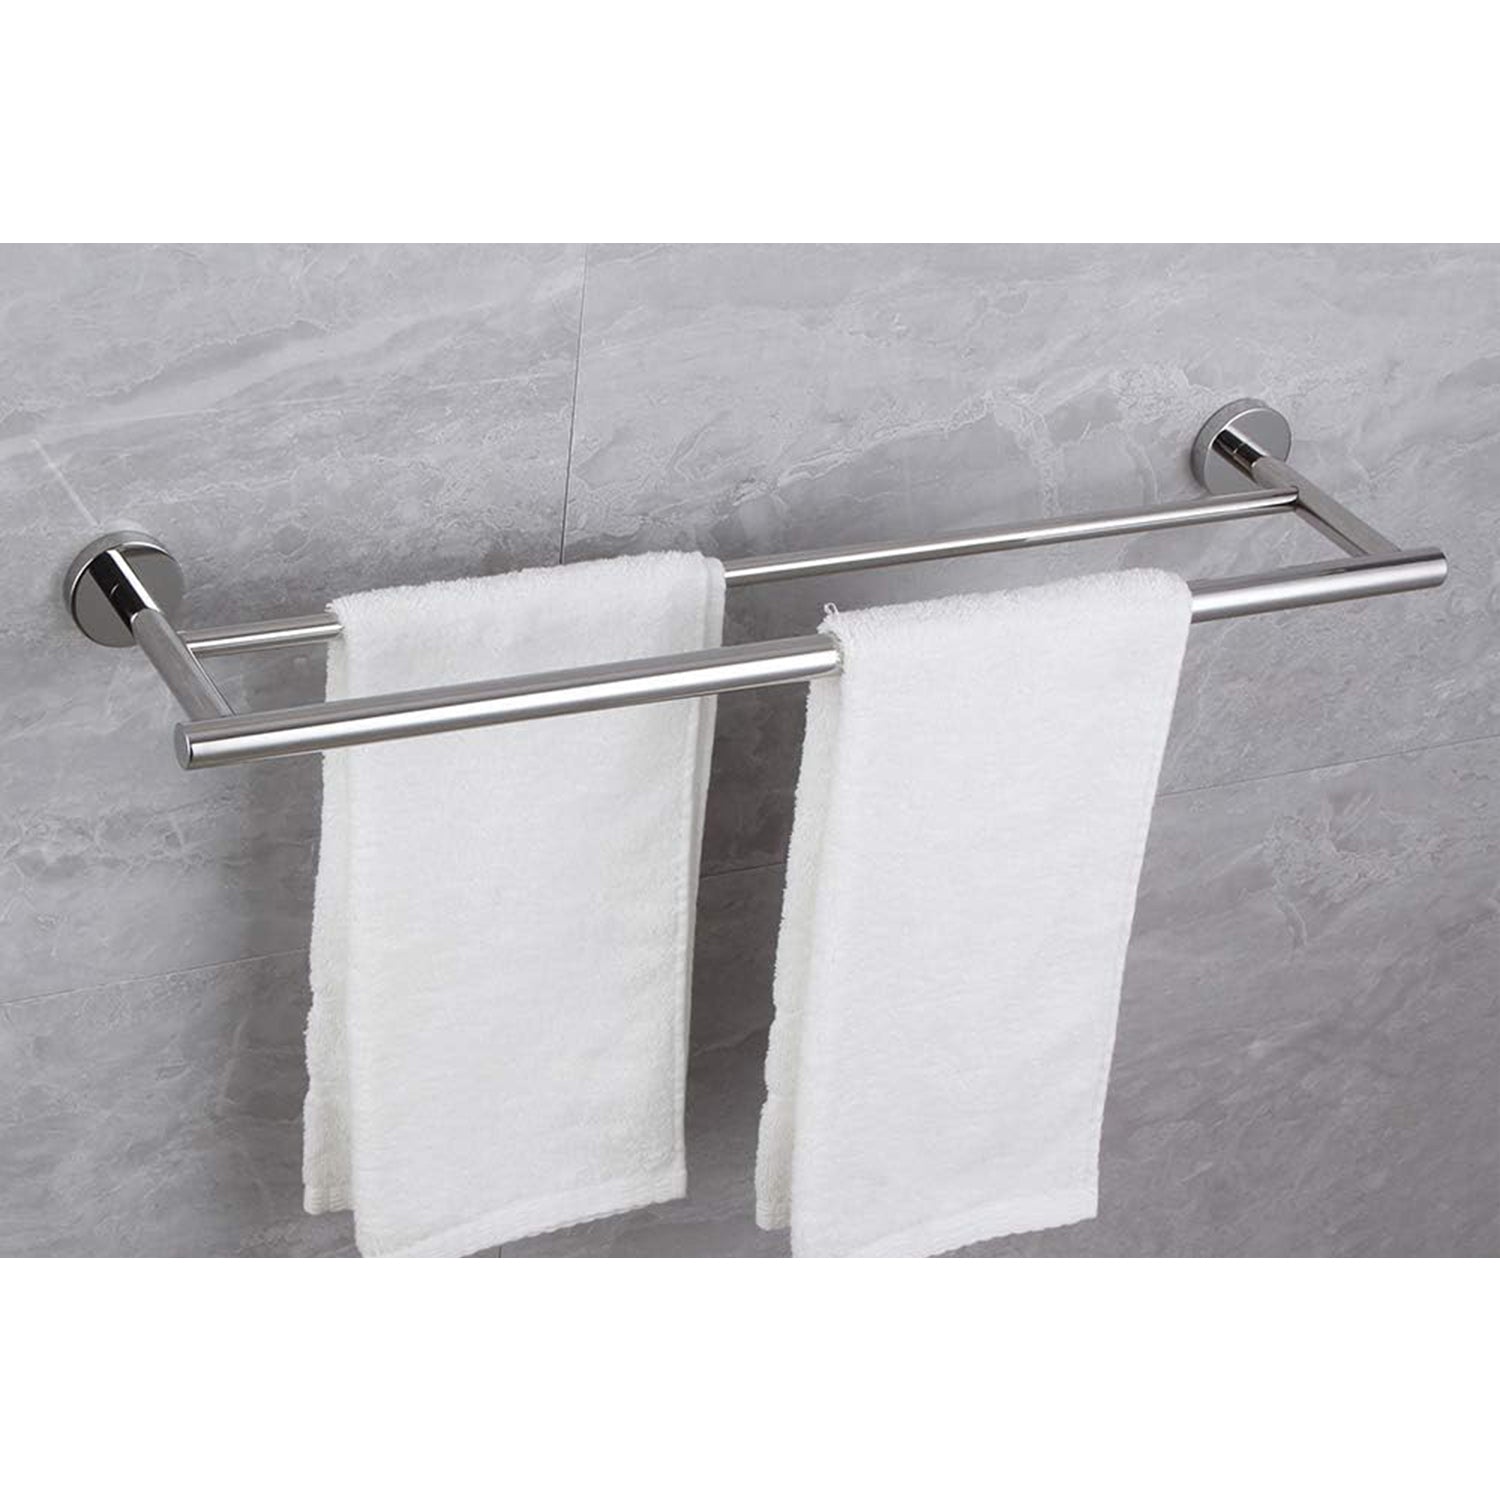 23.6'' Towel Bar Wall Mounted chrome-stainless steel